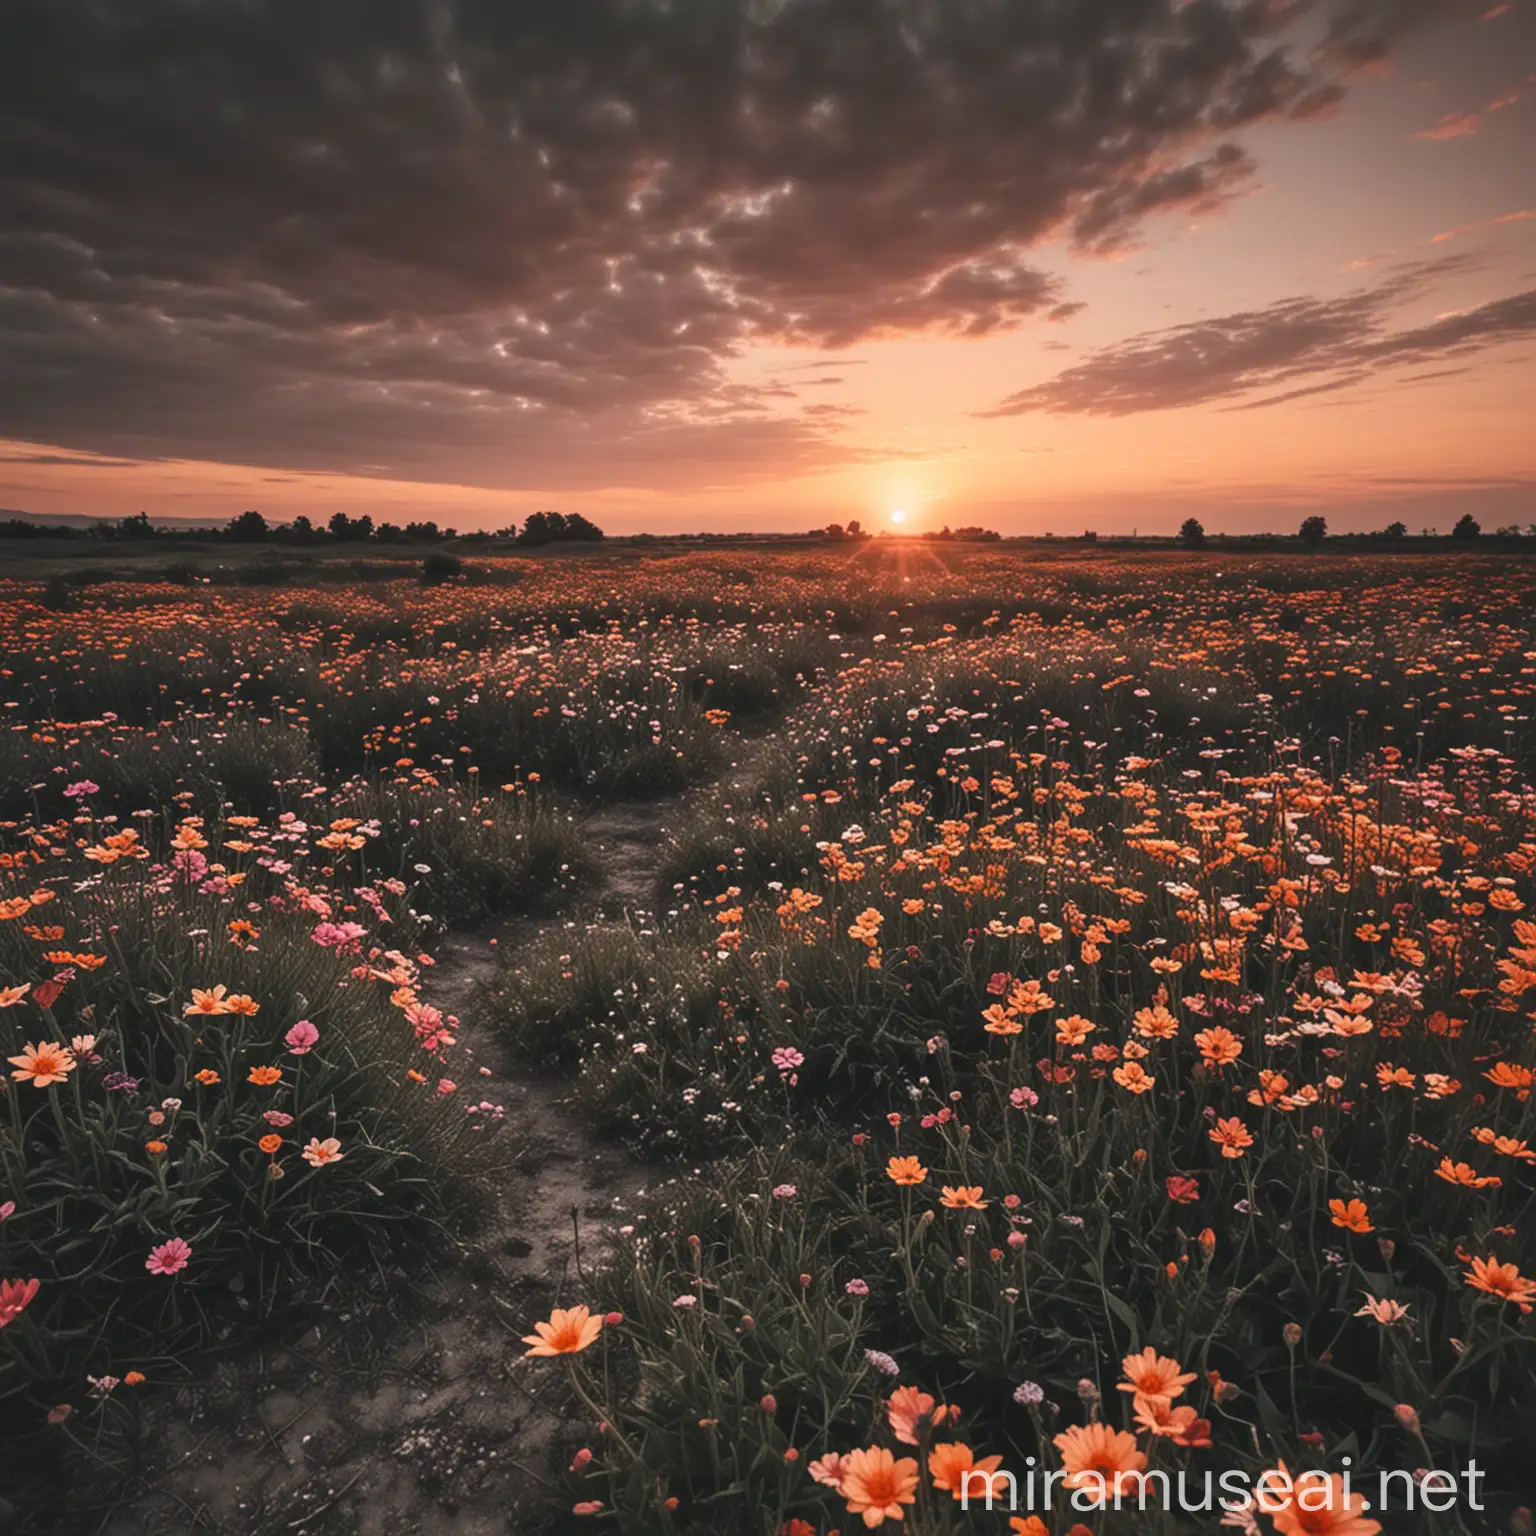 Sunset Landscape with Half Color and Half Desaturated Floral Scene